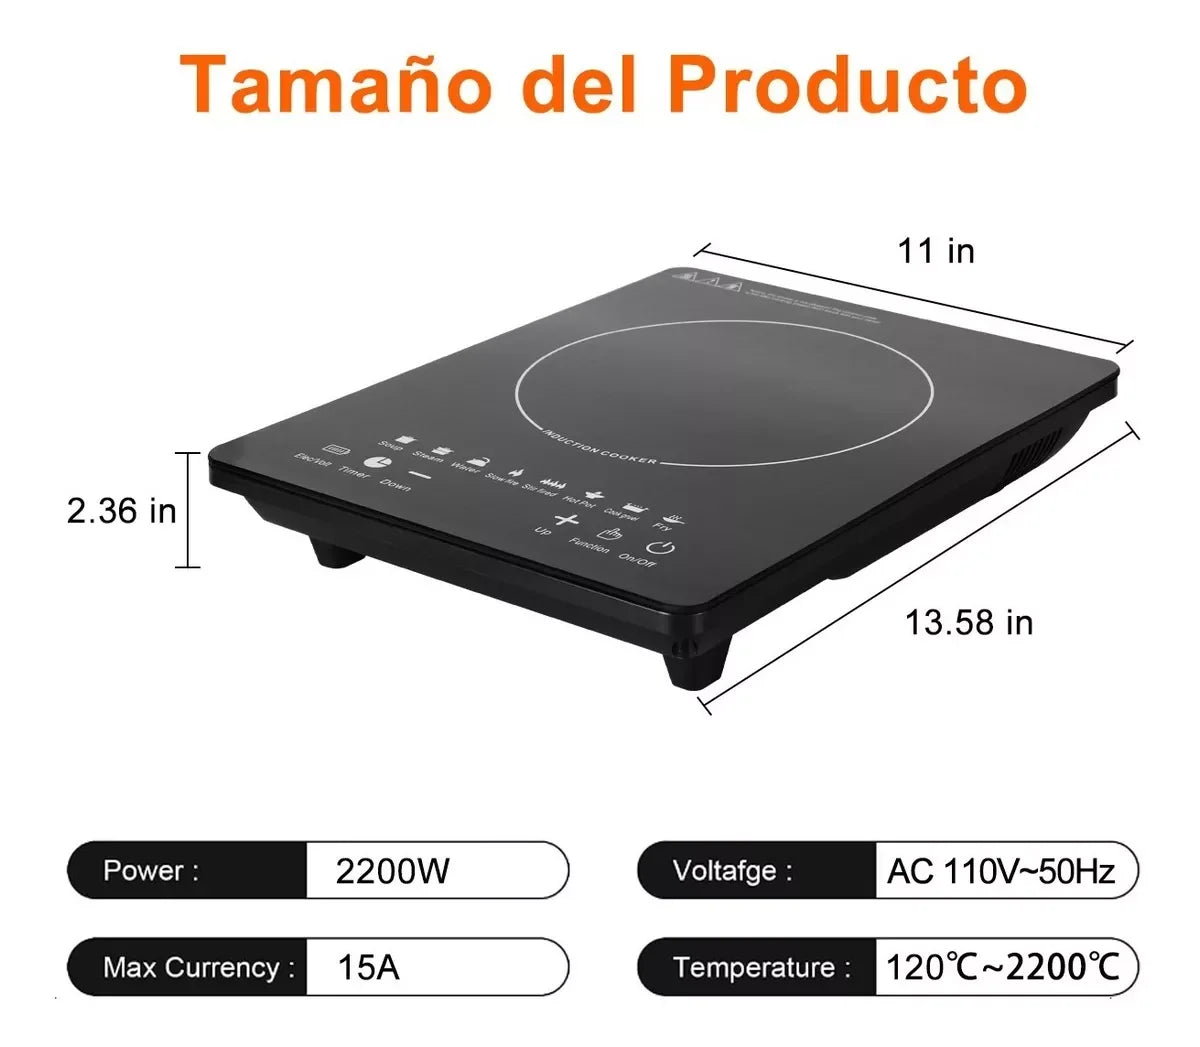 Portable Induction Cooktop Induction 8 Temp Touch Single Burner Cooker With Ultra Thin Body Low Noise Hotplate 2200W Sensor